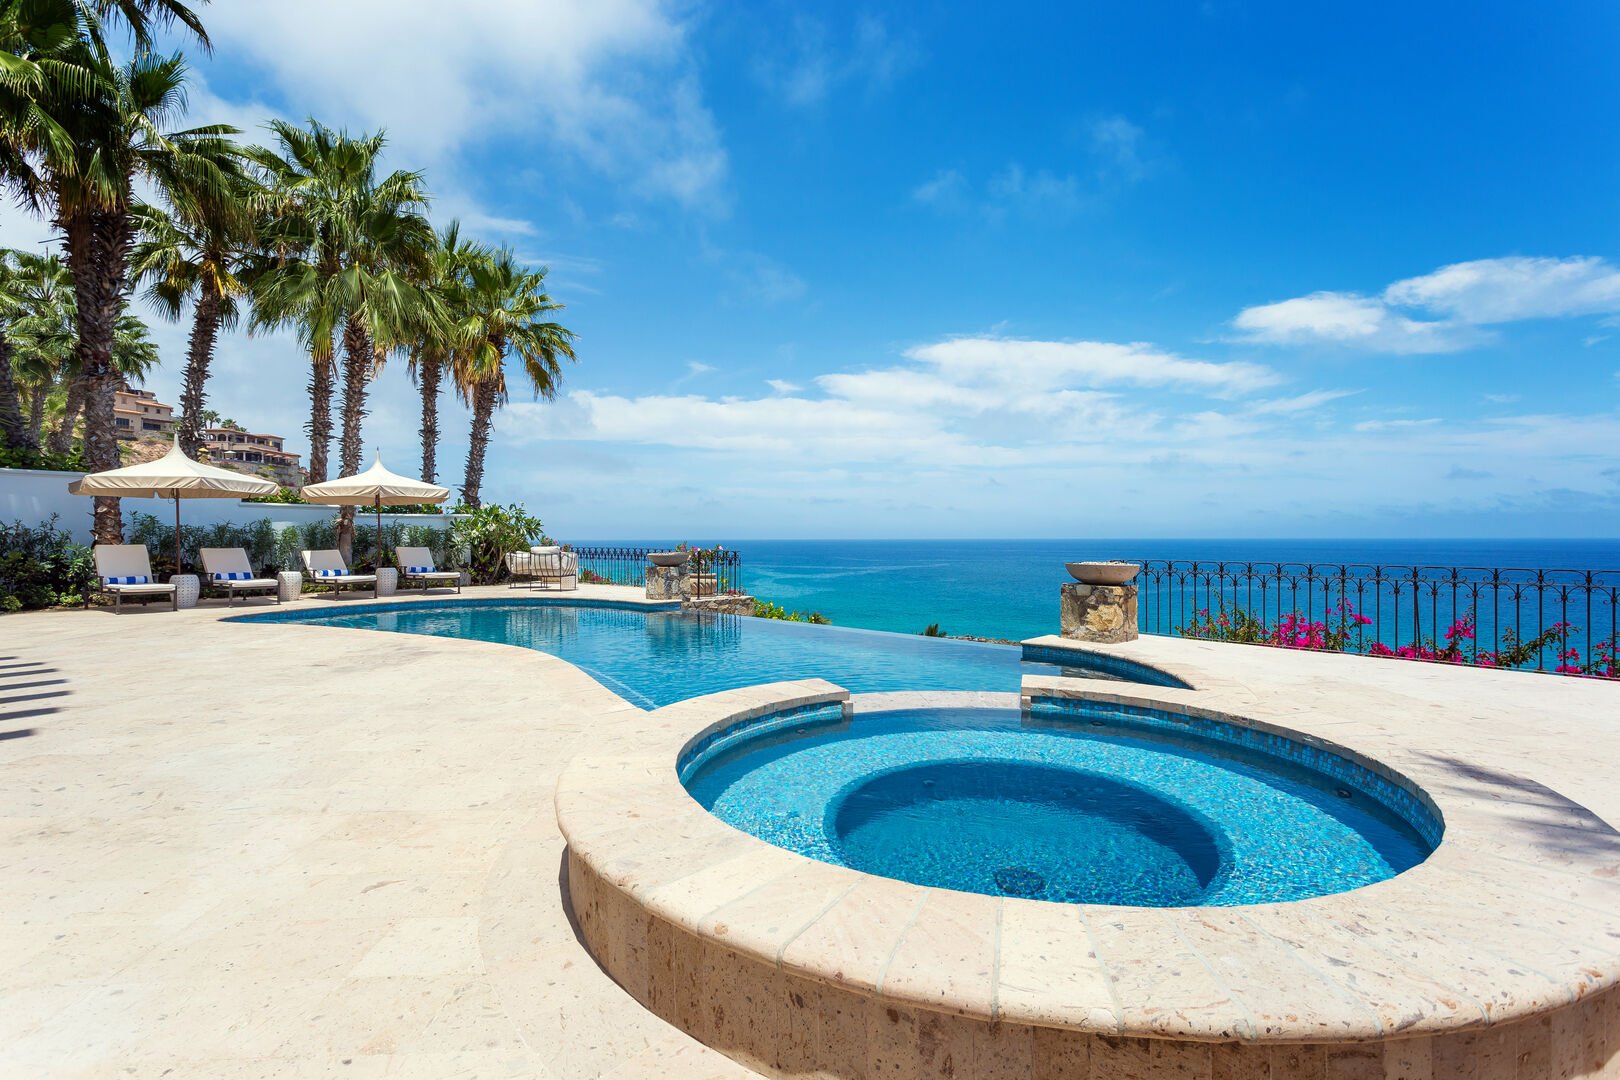 Infinity pool and jacuzzi with ocean views in our Cabo luxury vacation rental